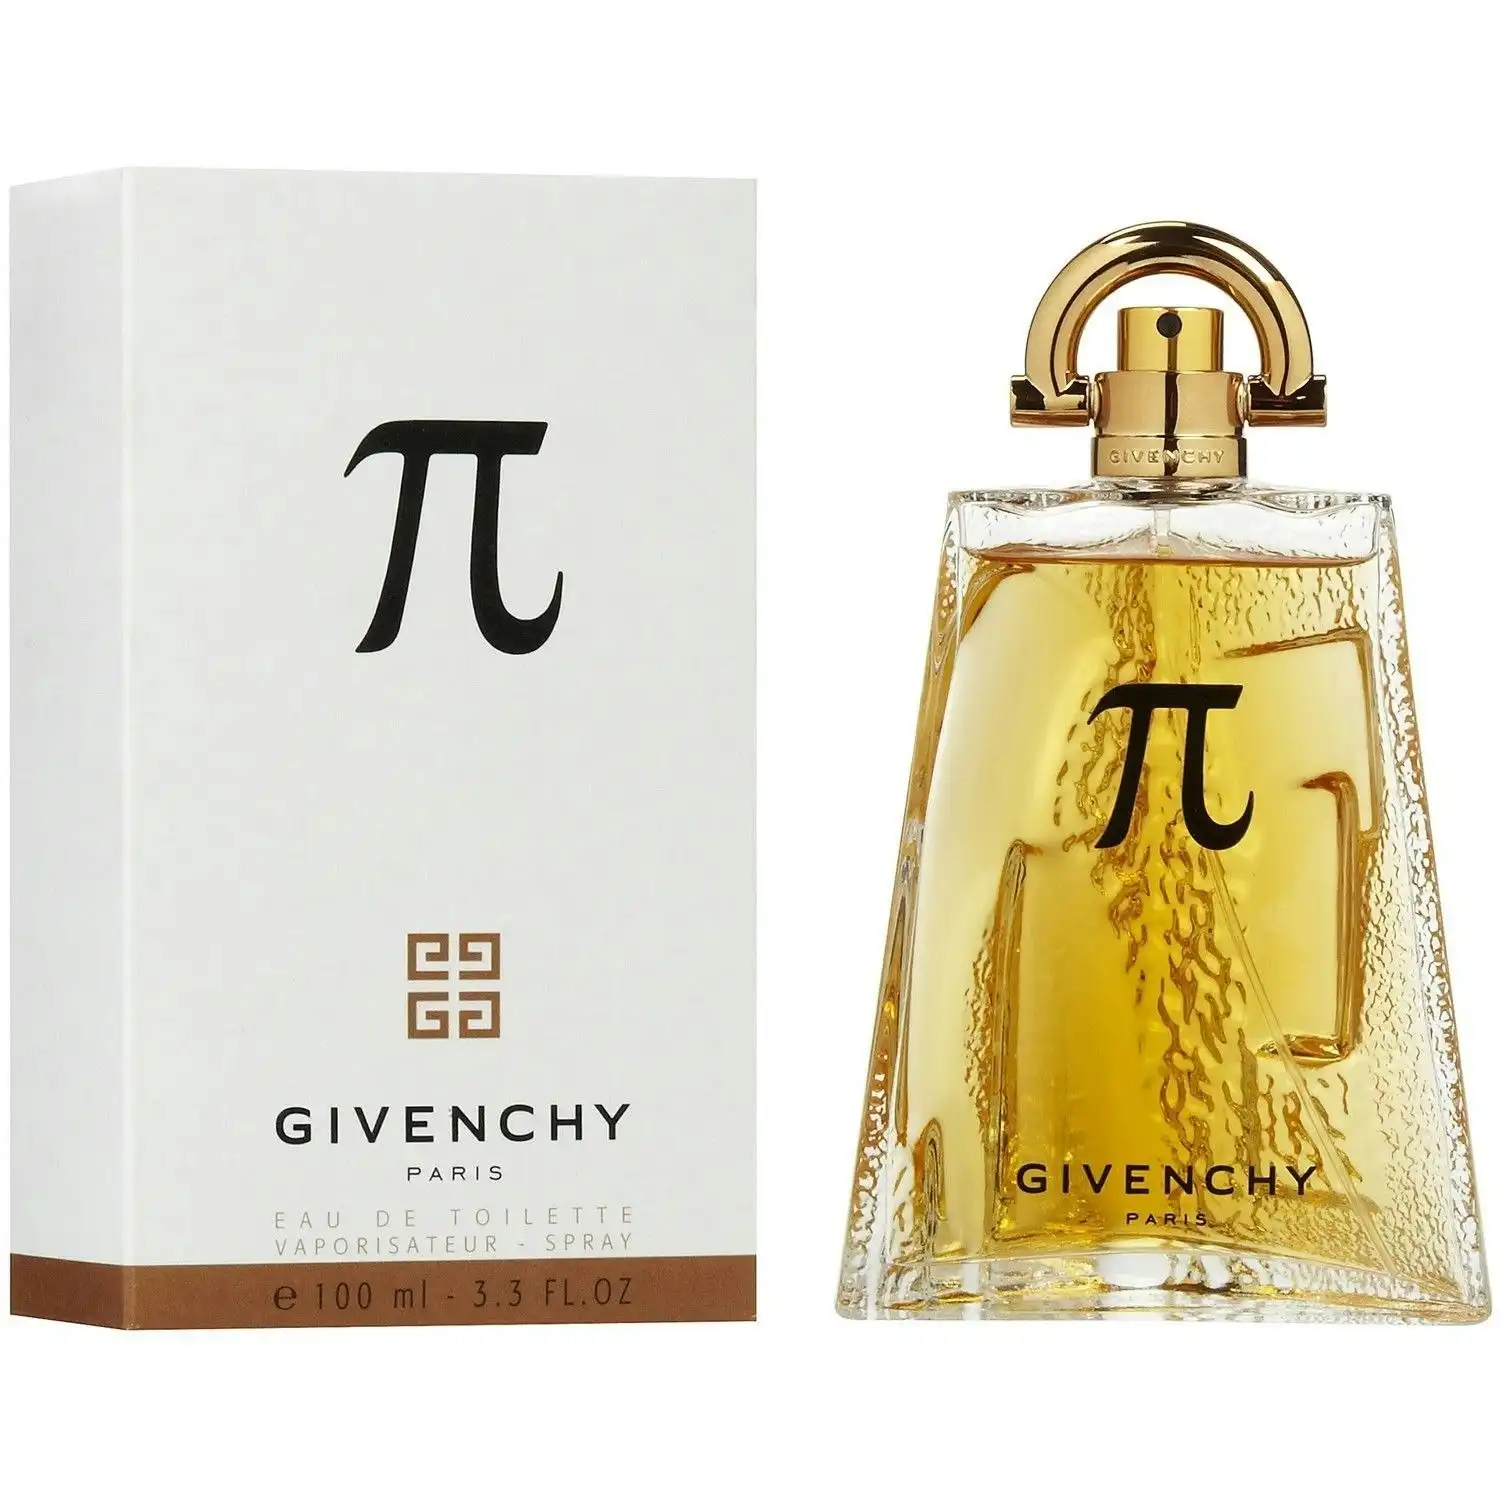 PI by Givenchy EDT Spray 100ml For Men